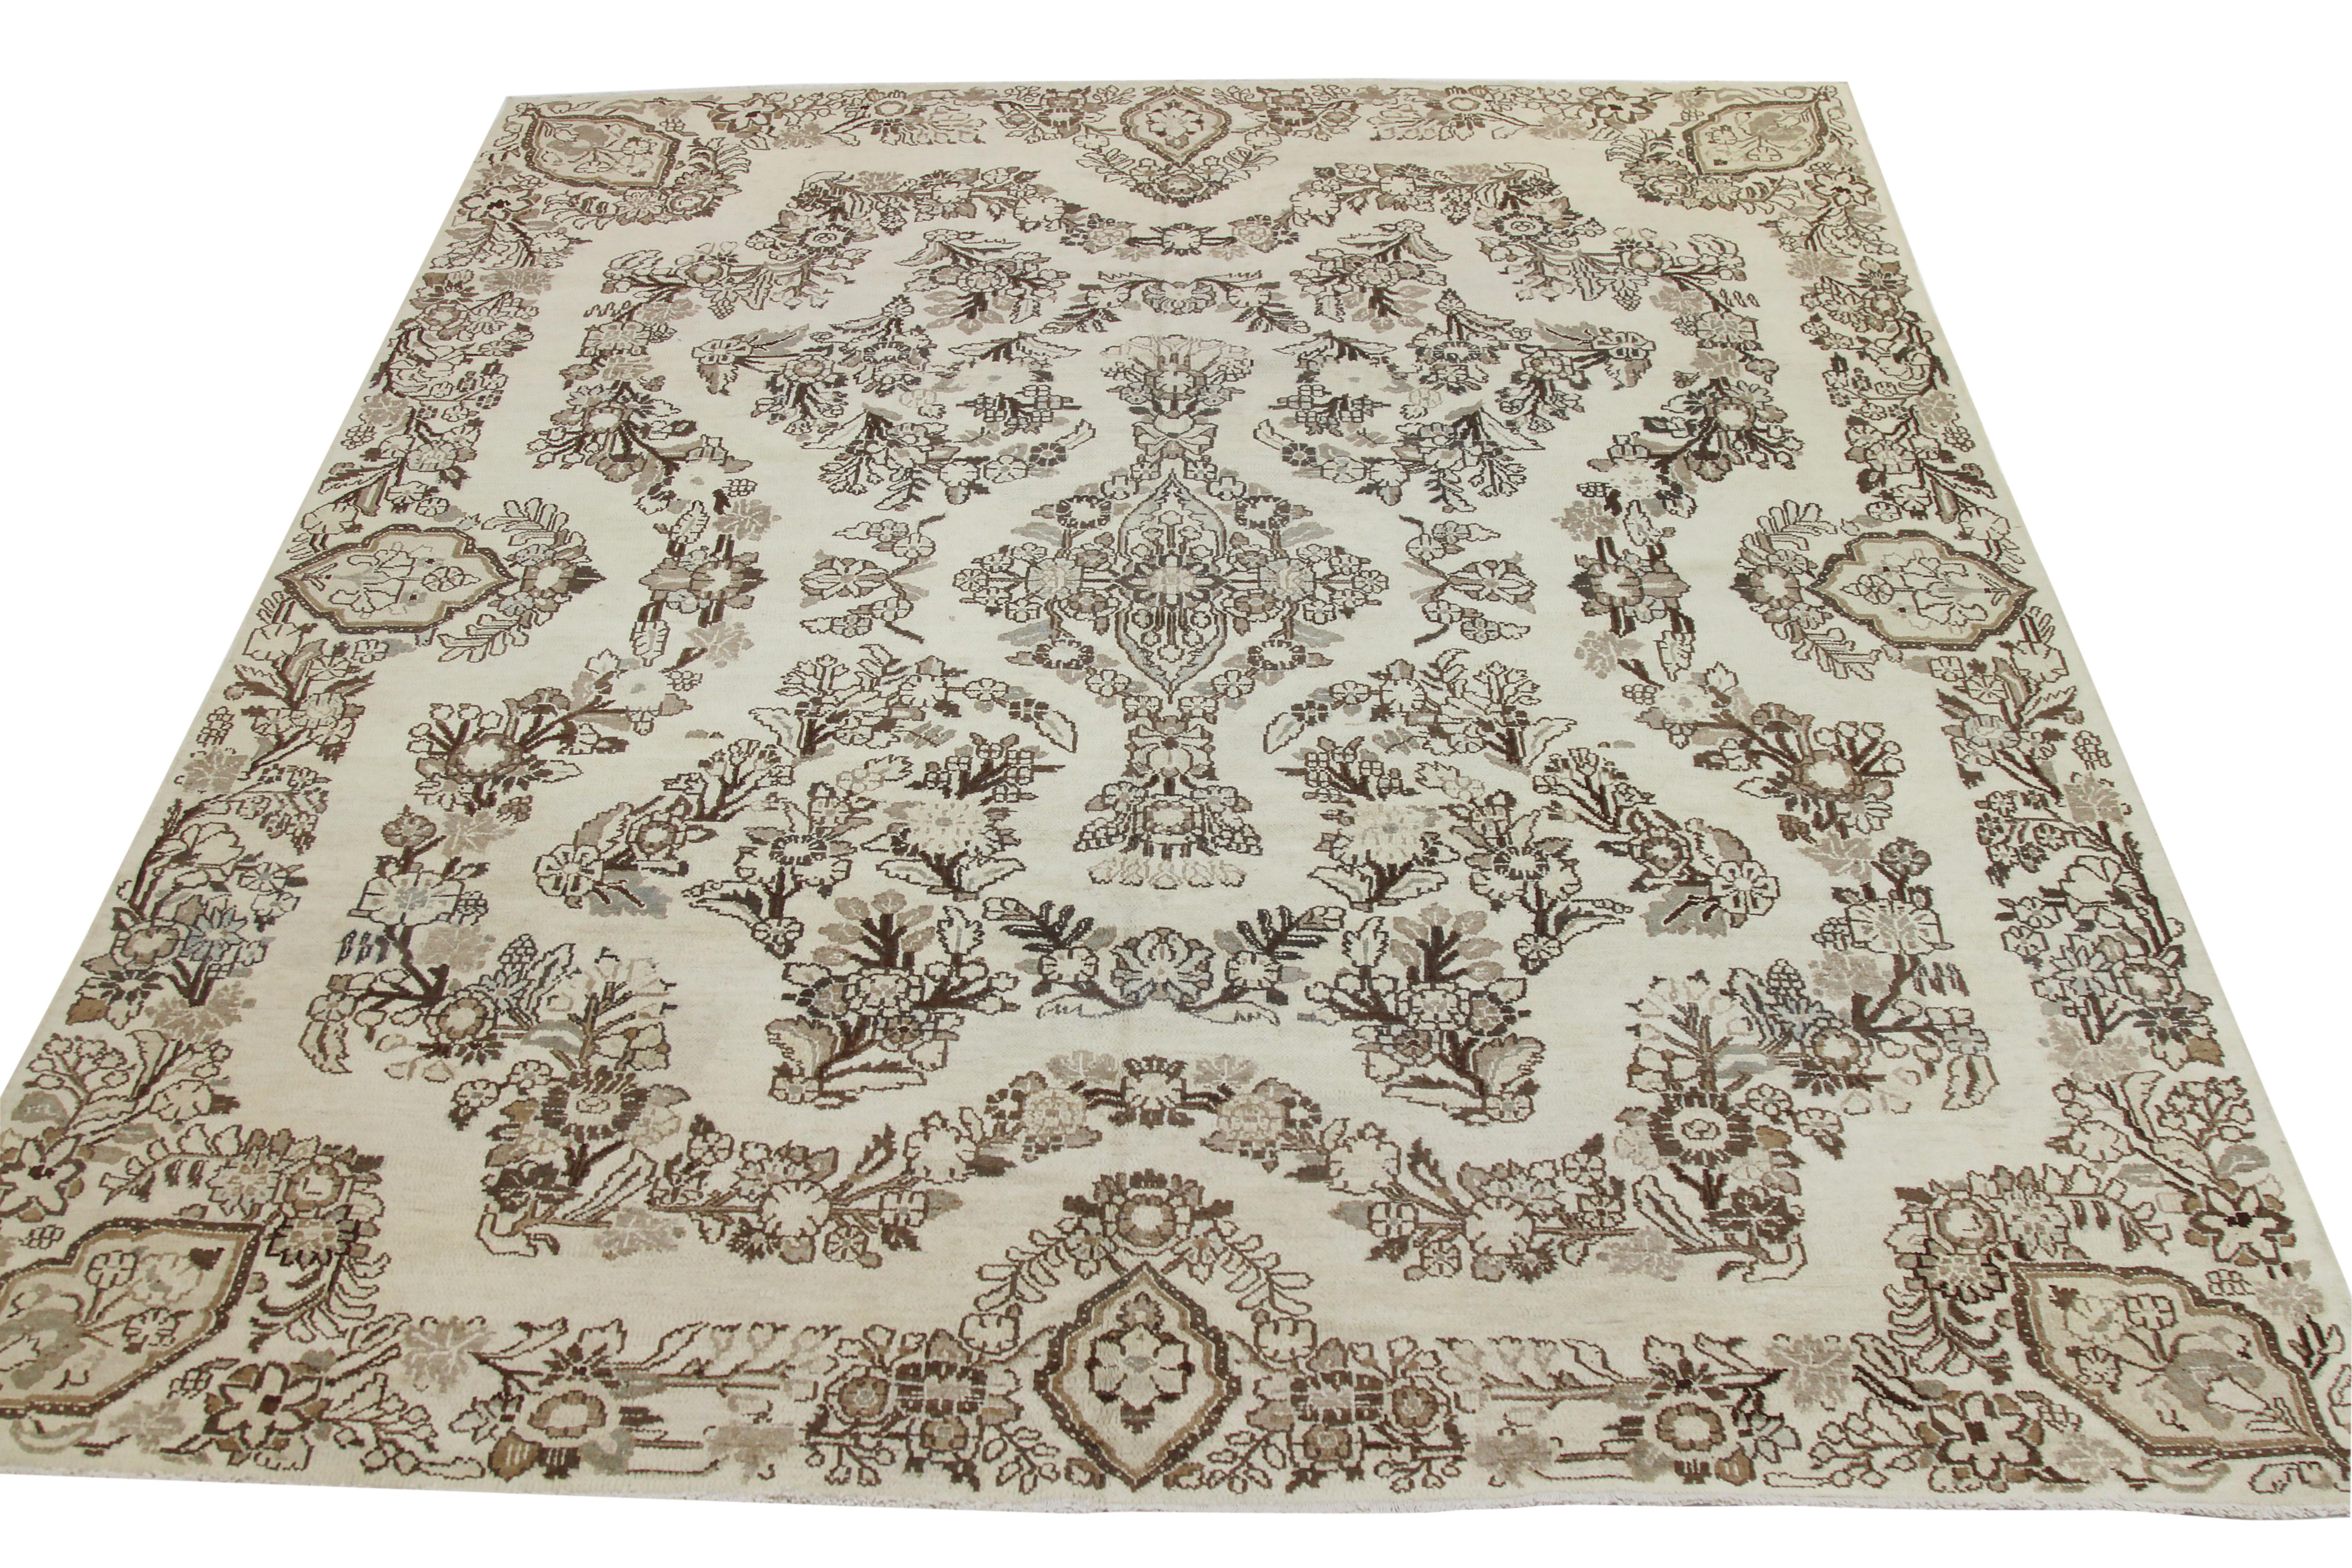 Antique Persian area rug handwoven from the finest sheep’s wool. It’s colored with all-natural vegetable dyes that are safe for humans and pets. It’s a traditional Malayer design in a botanical design on an ivory field. It’s a lovely piece to